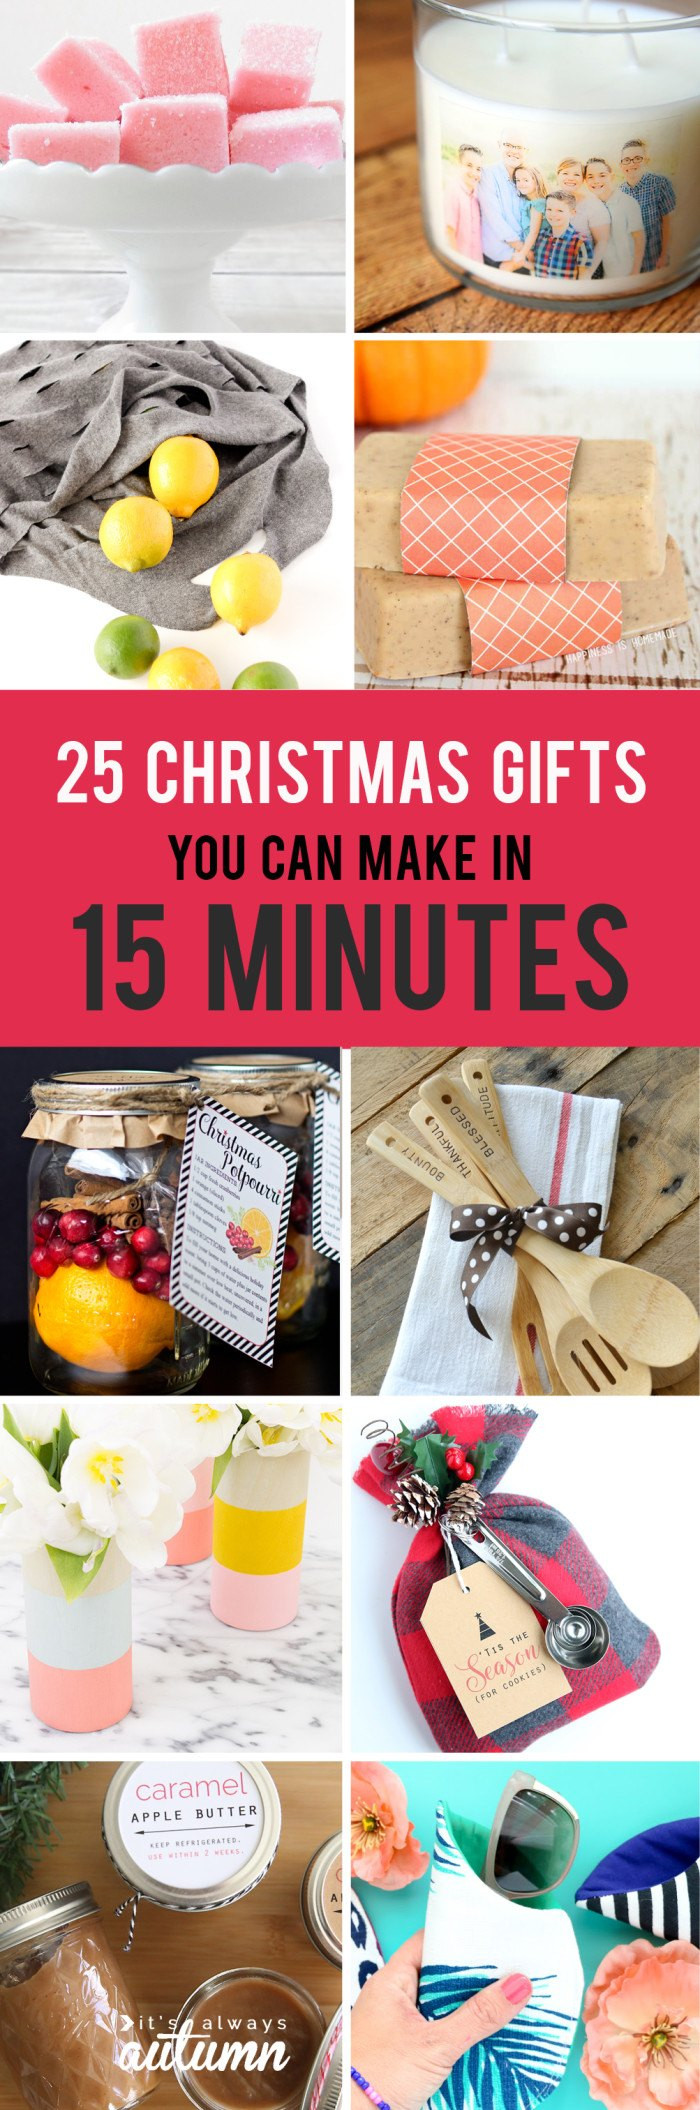 DIY Gifts For Christmas
 25 Easy Christmas Gifts That You Can Make in 15 Minutes